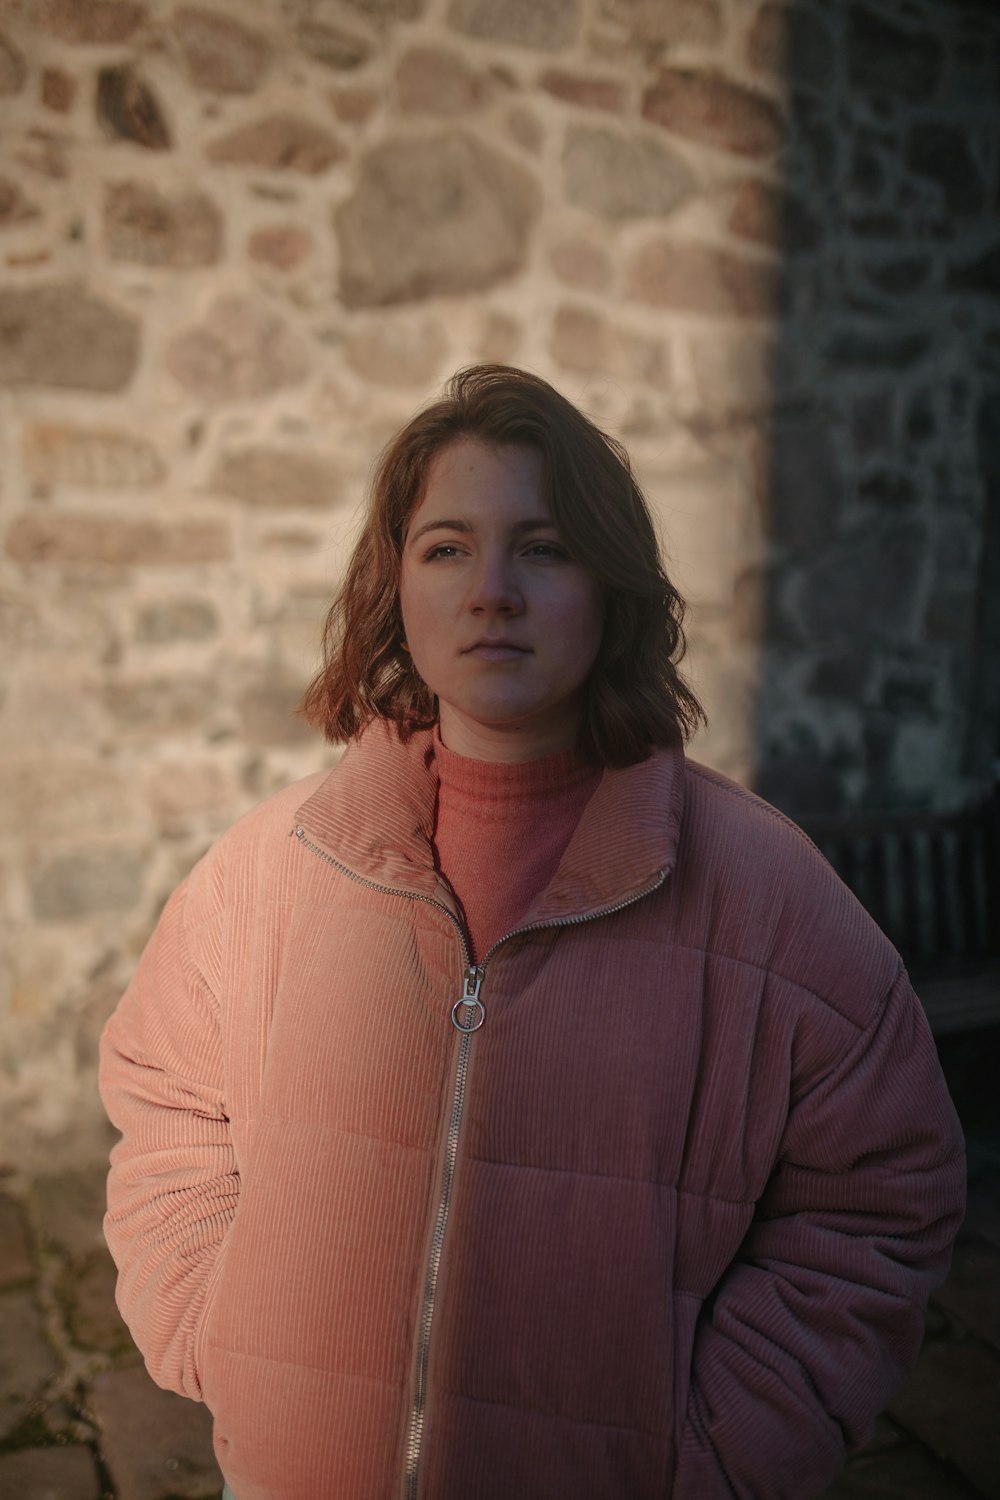 standing woman wearing pink zip-up jacket near bricked wall